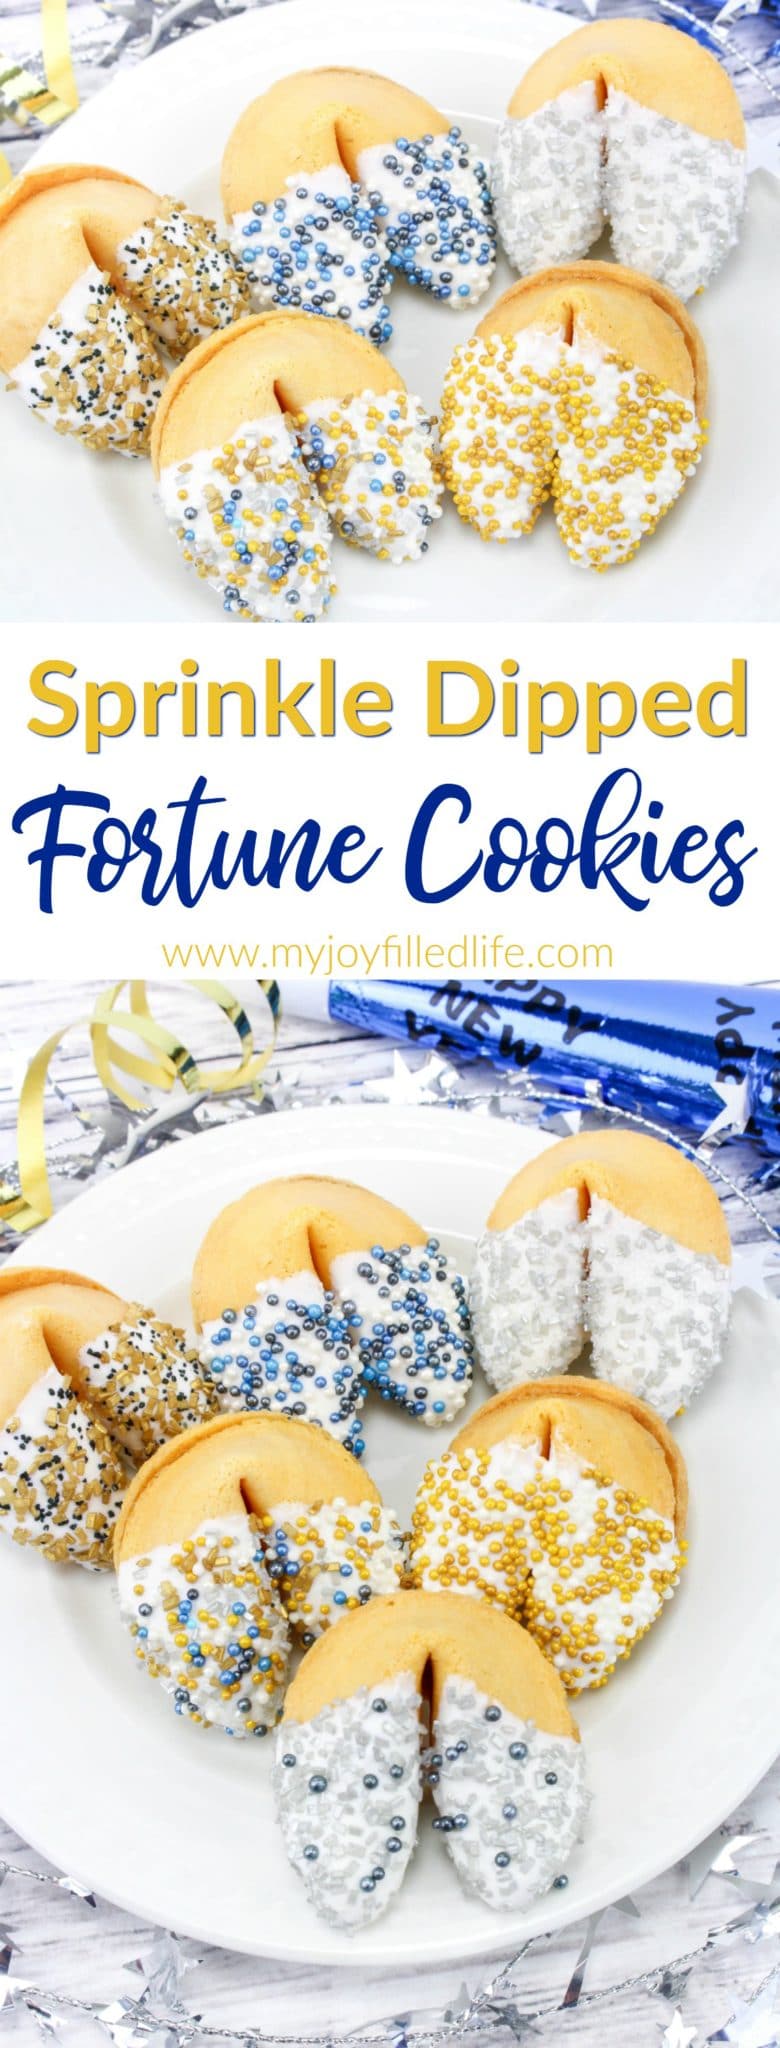 These sprinkle dipped fortune cookies are a great way to dress up your party spread and would make a great party favor as well. #partyfavor #fortunecookie